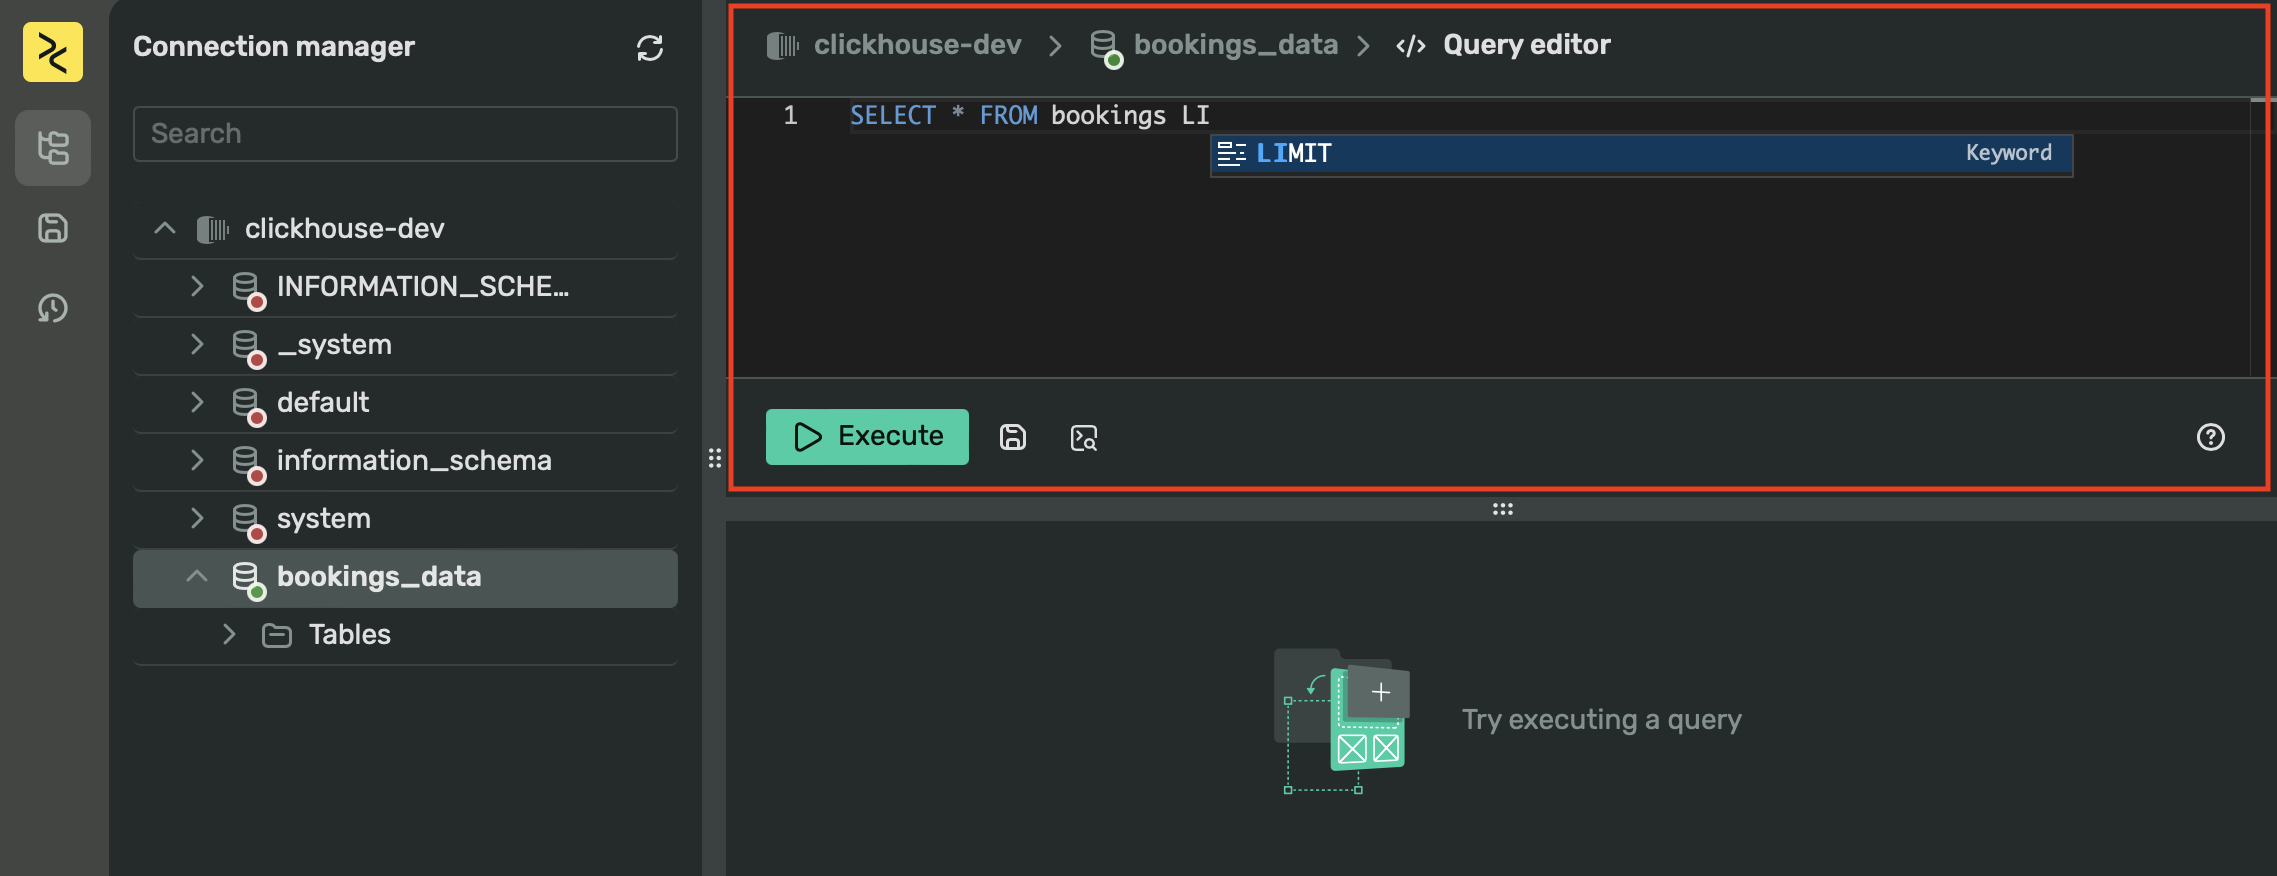 Screenshot of WebSQL showing the query editor